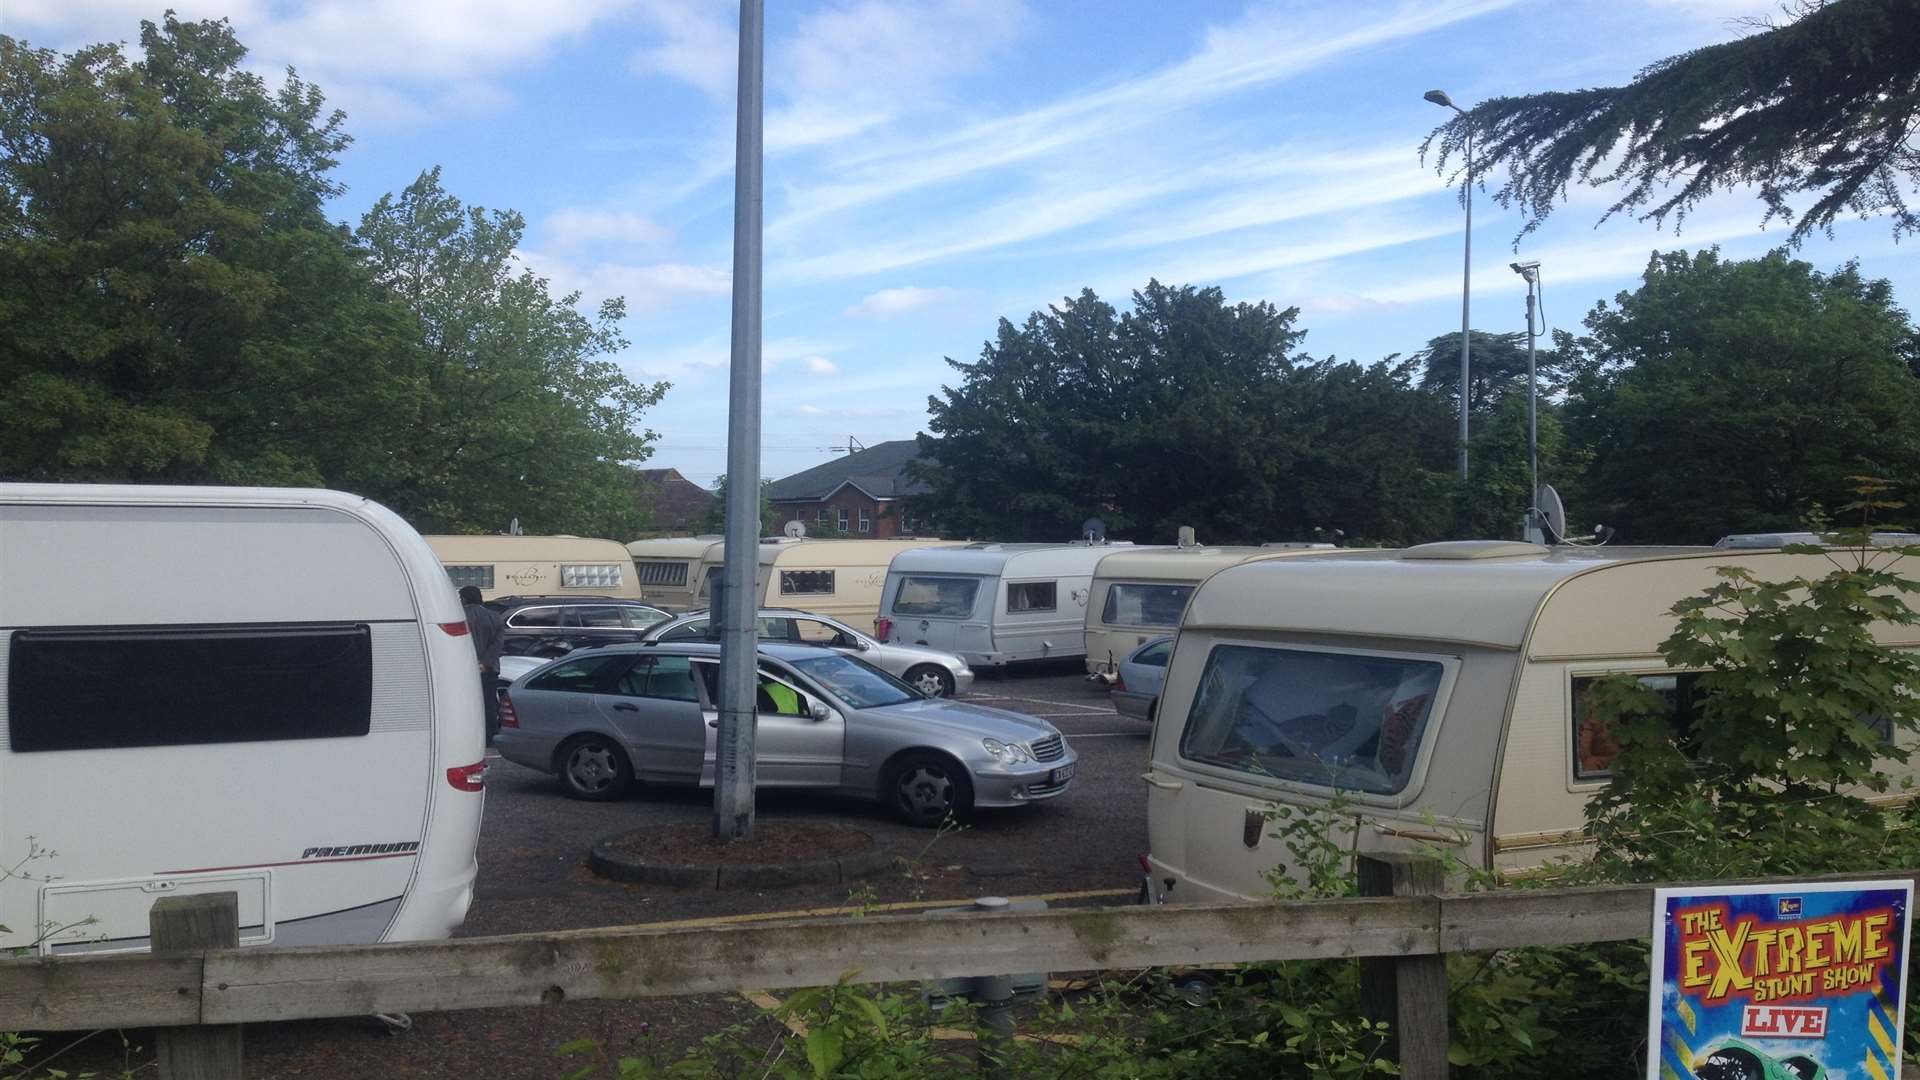 A witness said there are about ten caravans in the car park